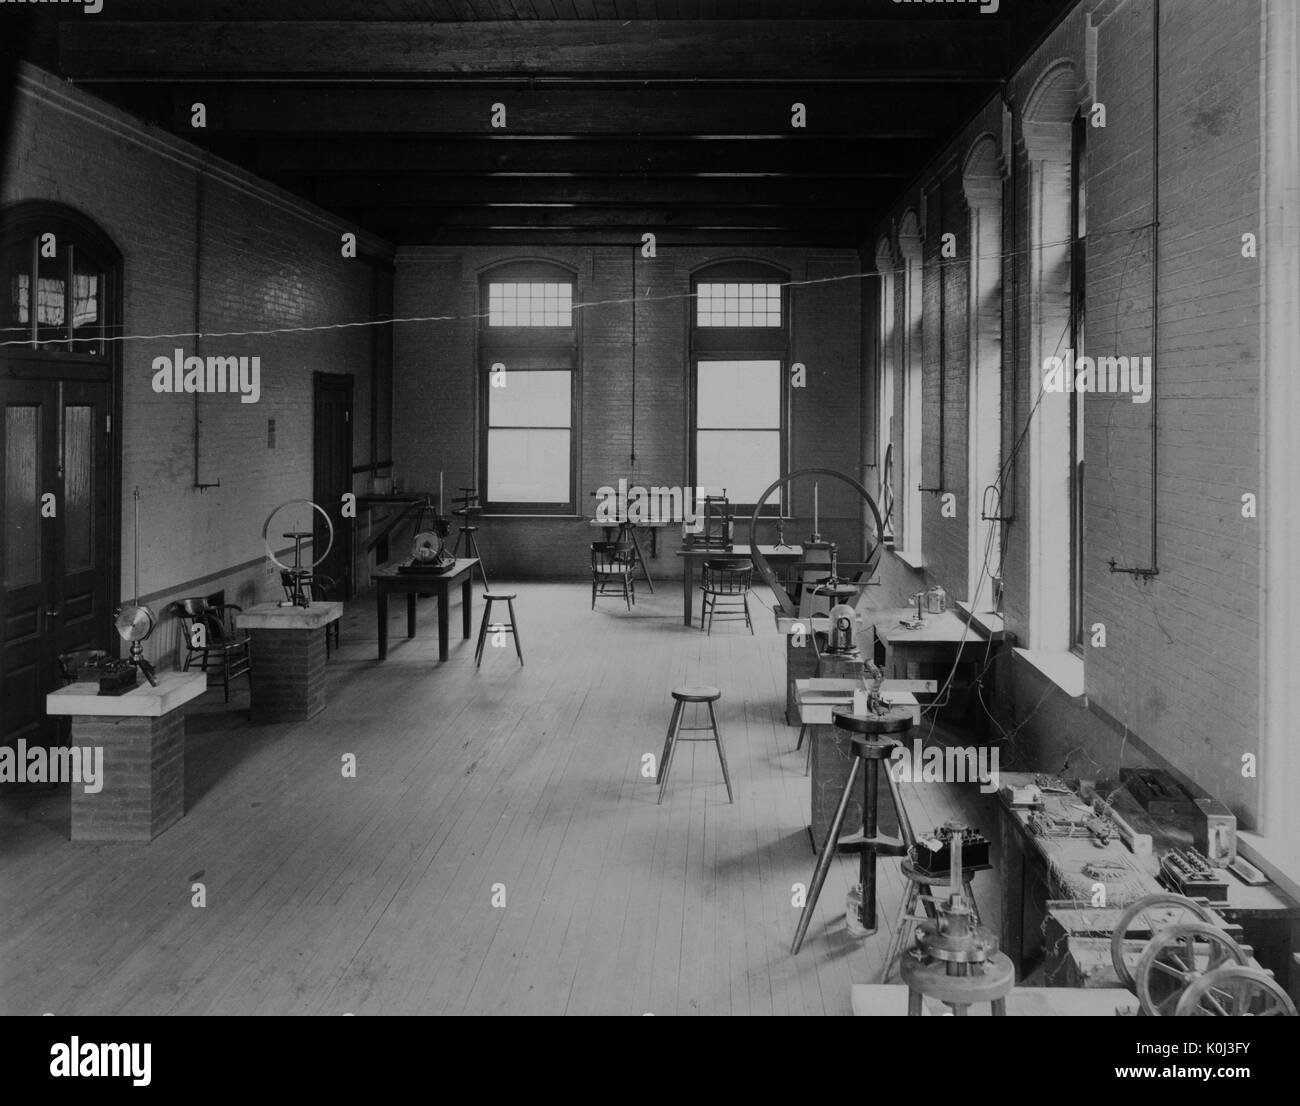 Photograph of the Johns Hopkins physics undergraduate electricity and magnetism lab, with a wooden floor and brick desks and wooden stools, with large windows on the walls and miscellaneous instruments and tools on the desks. 1900. Stock Photo